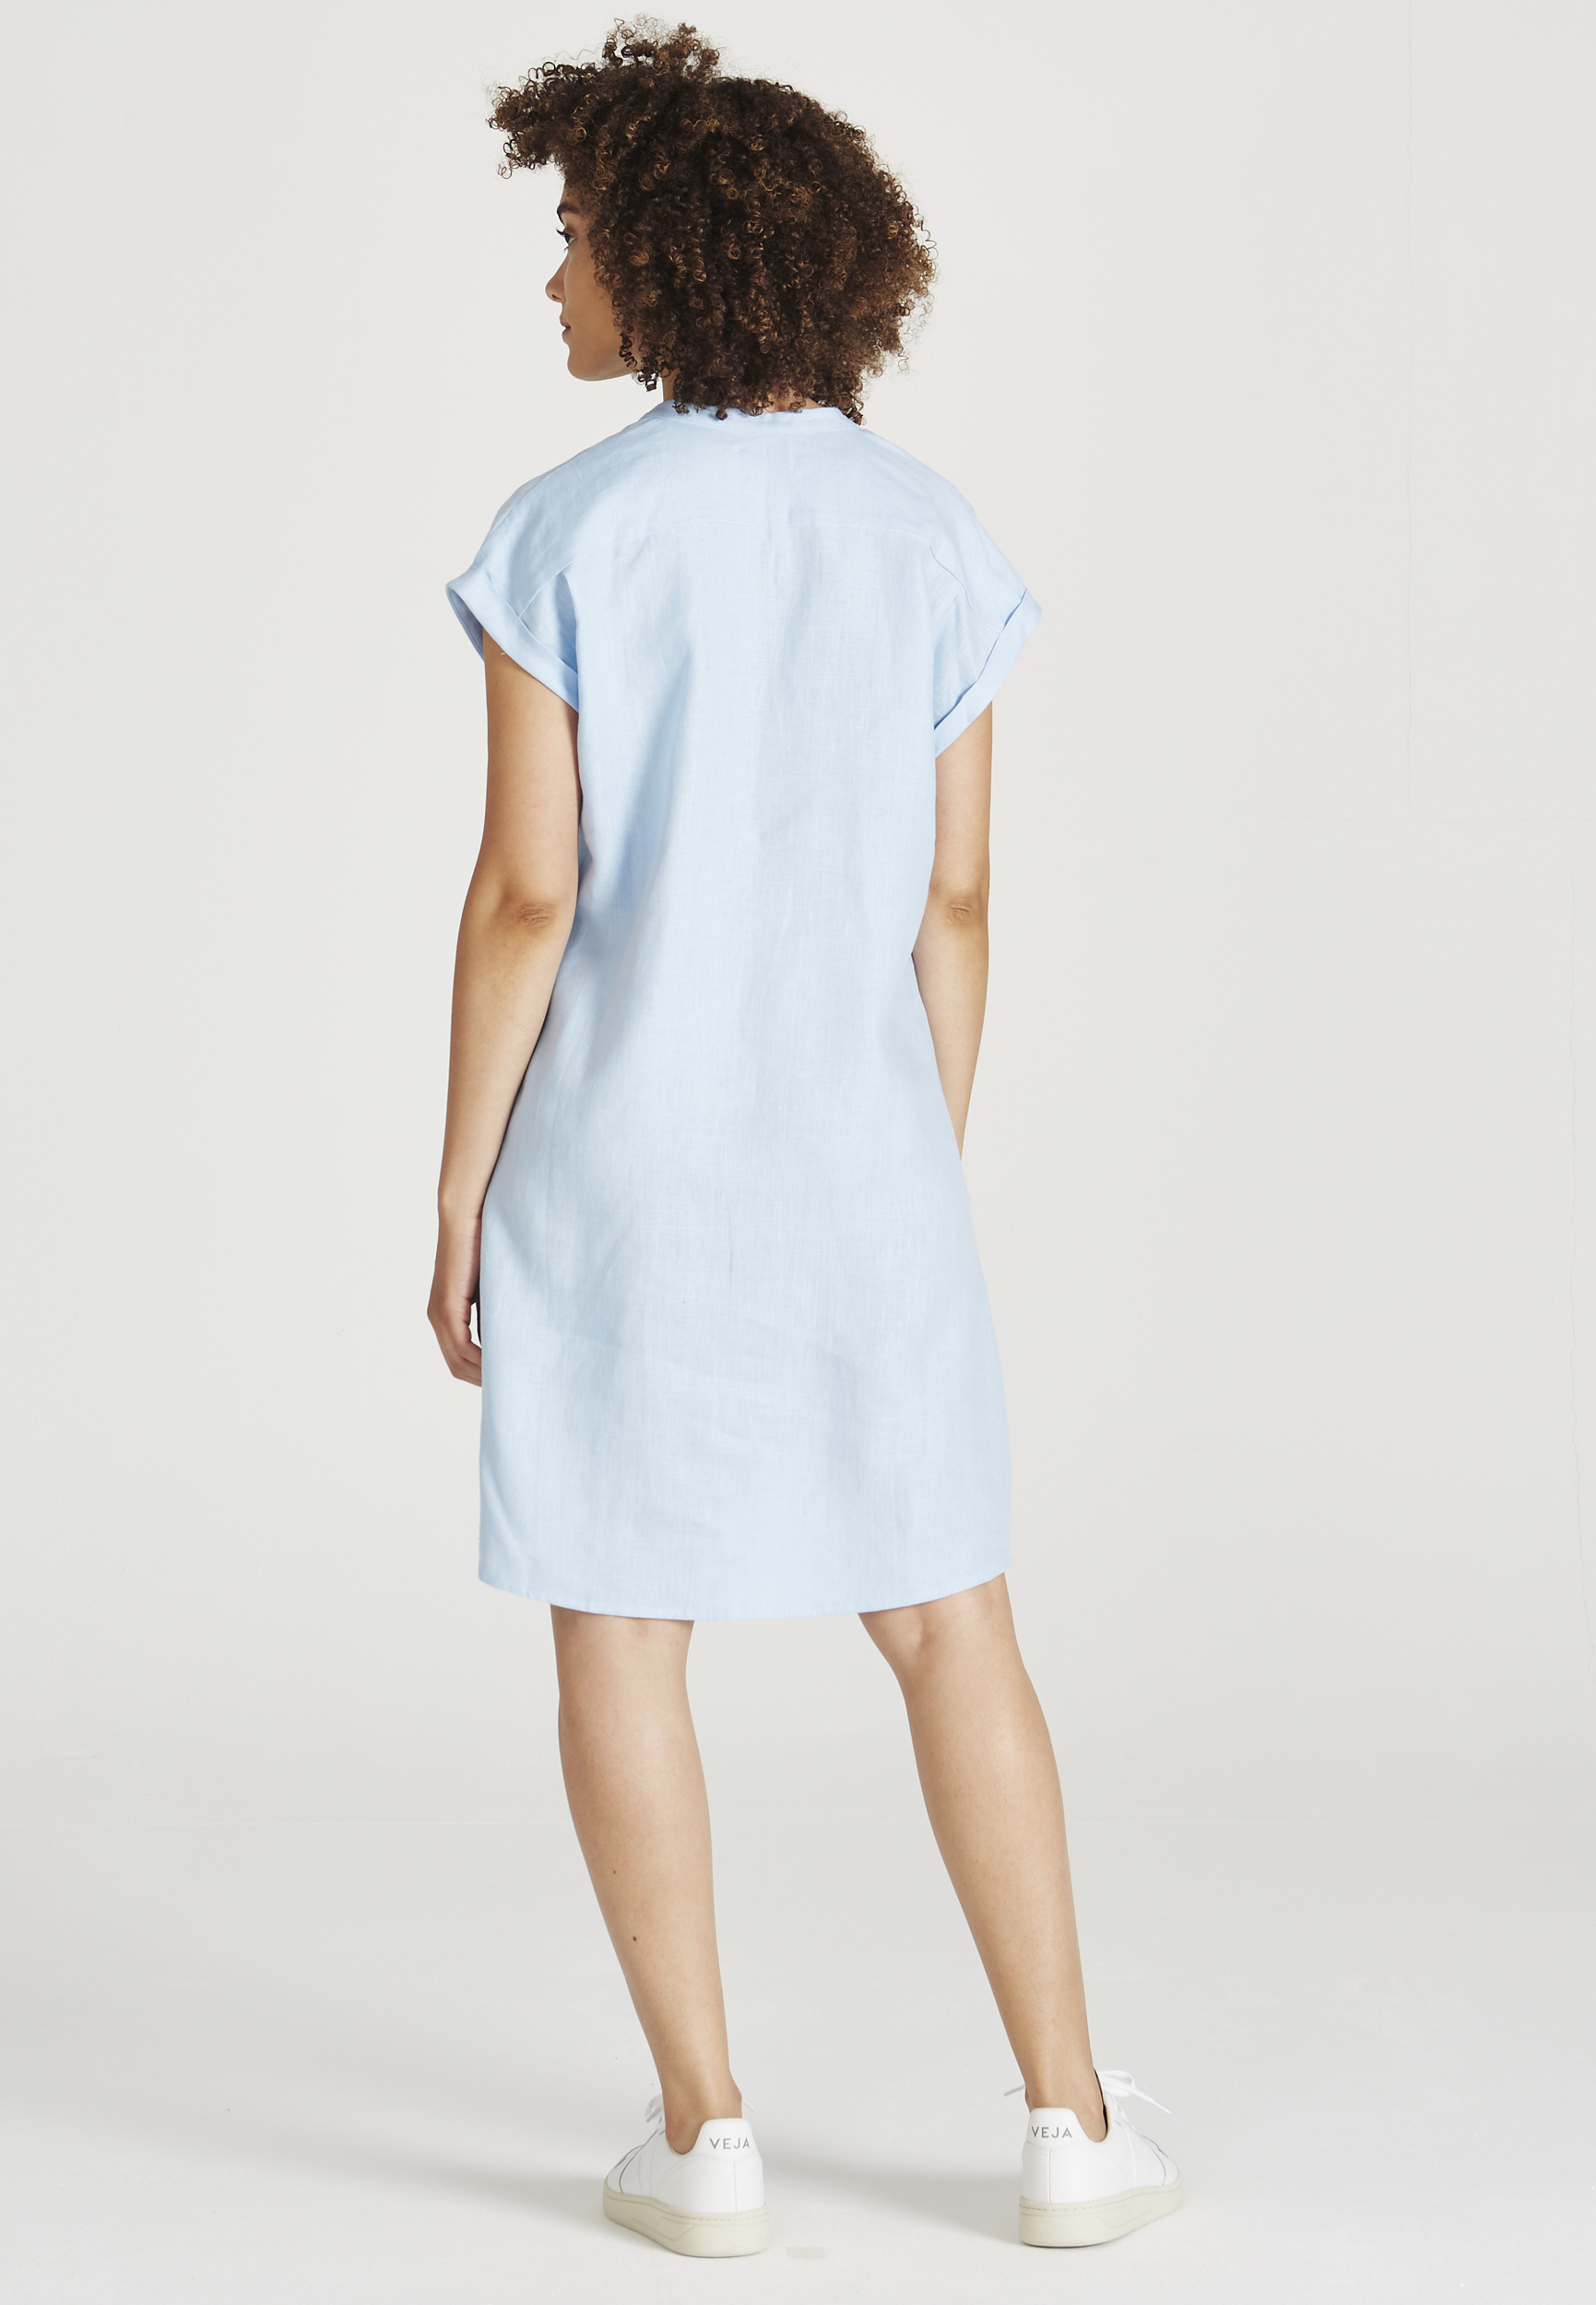 GB 1011 - Pale Blue (Linen) - Extra 3